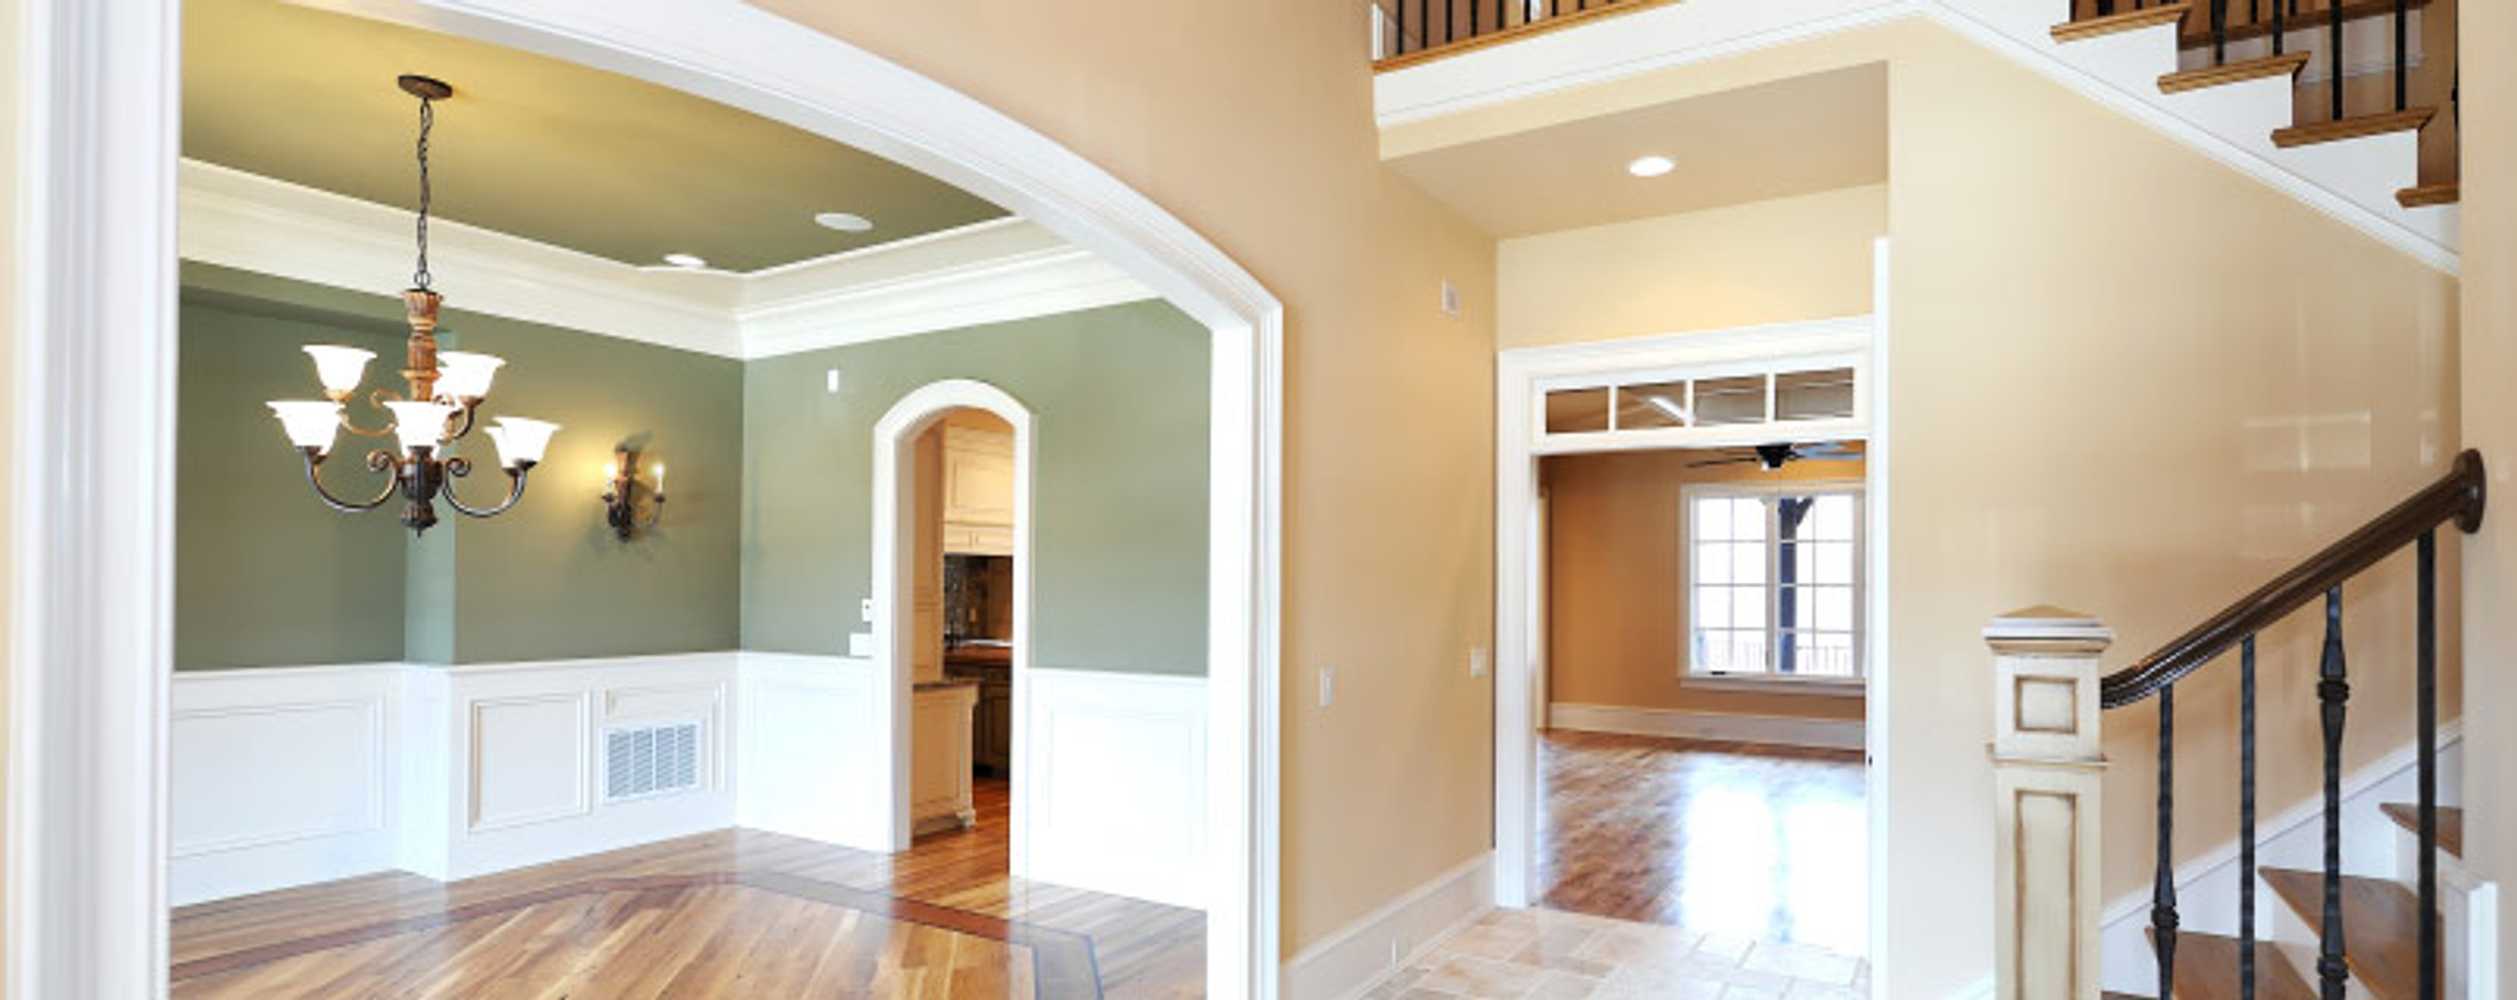 Photo(s) from Sioux Falls Paint and Decorating-6053363620